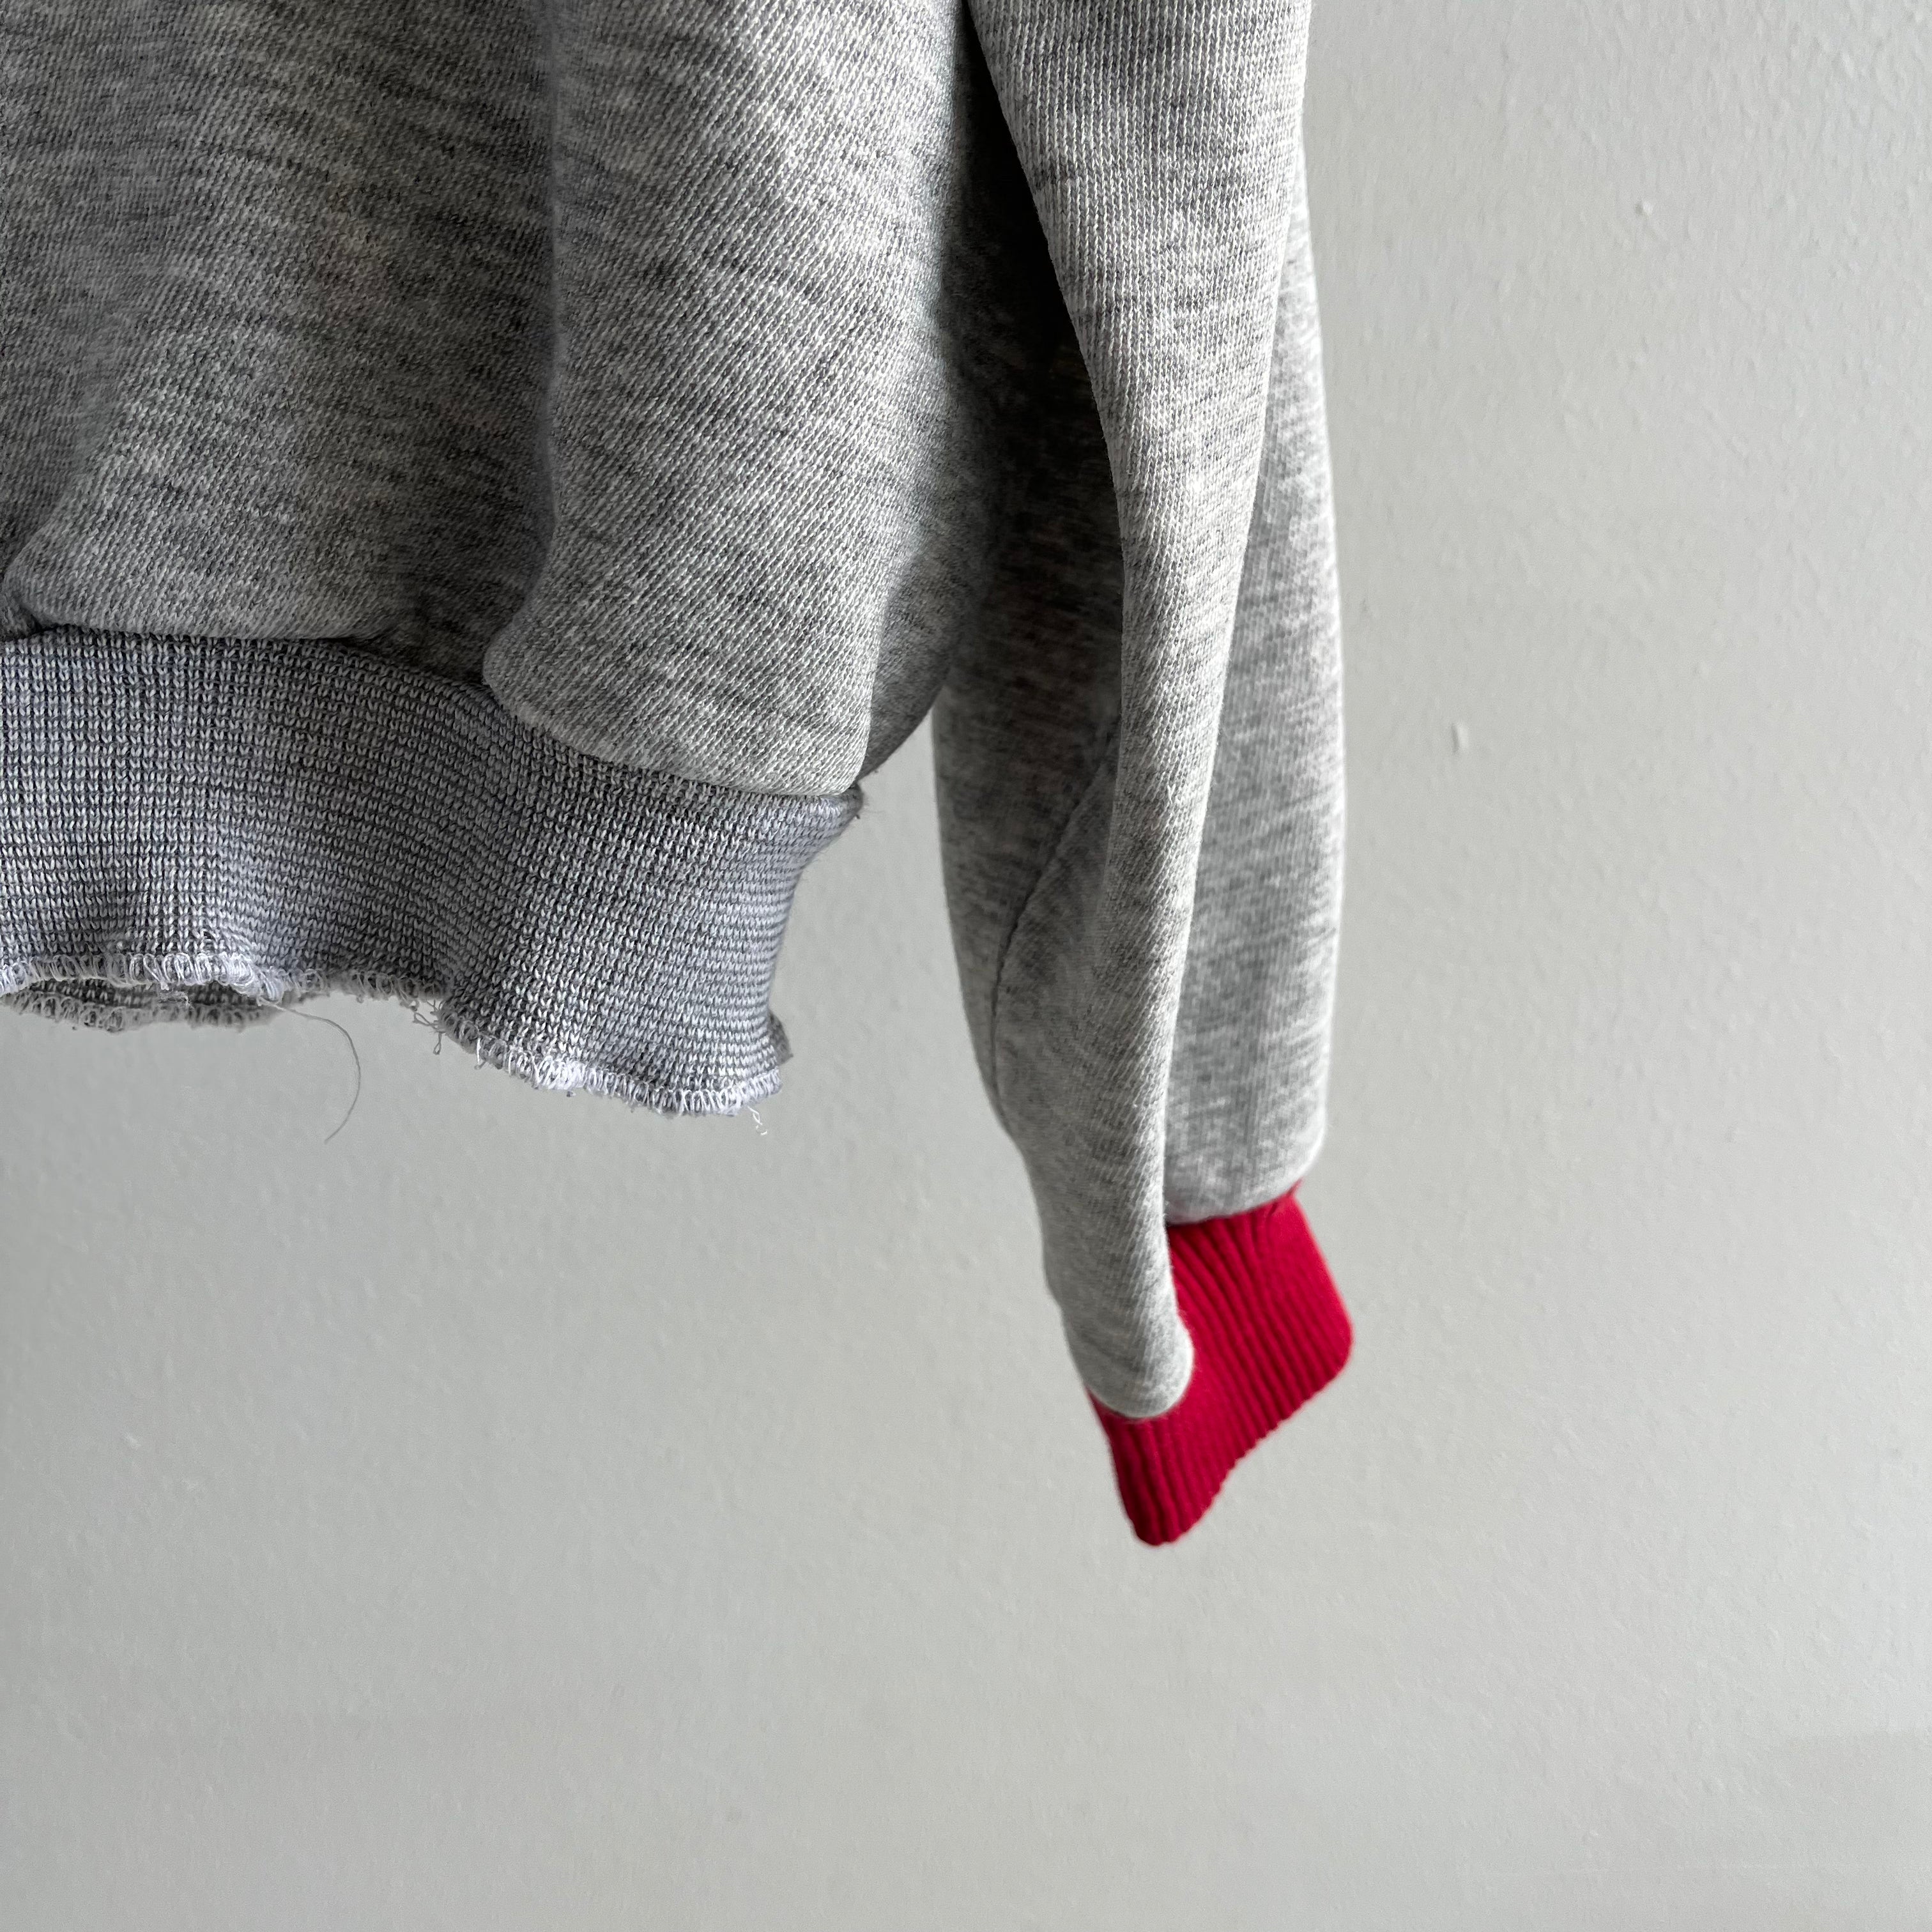 1990s DELIGHTFUL DIY Two Tone Gray and Red Sweatshirt